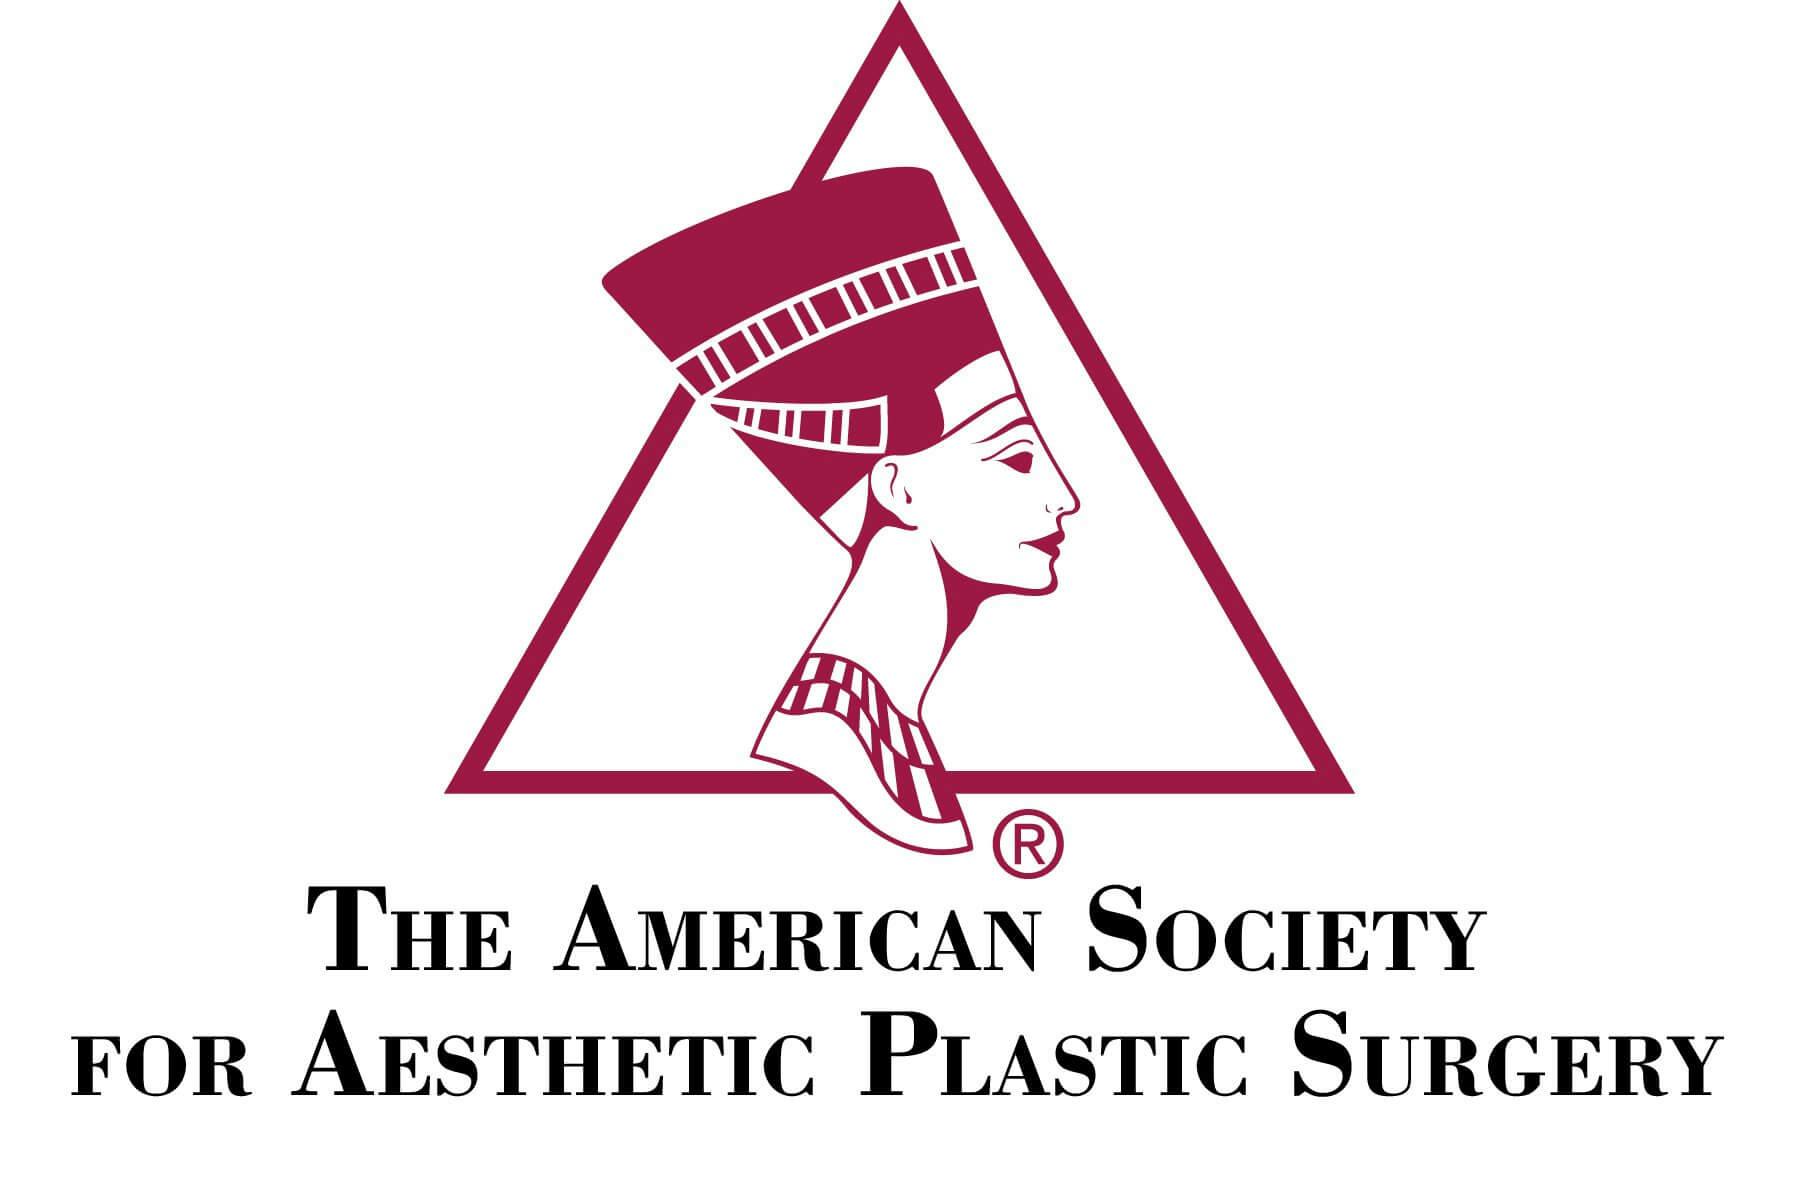 Dr. Pontell presented at the American Society for Aesthetic Plastic Surgery Conference